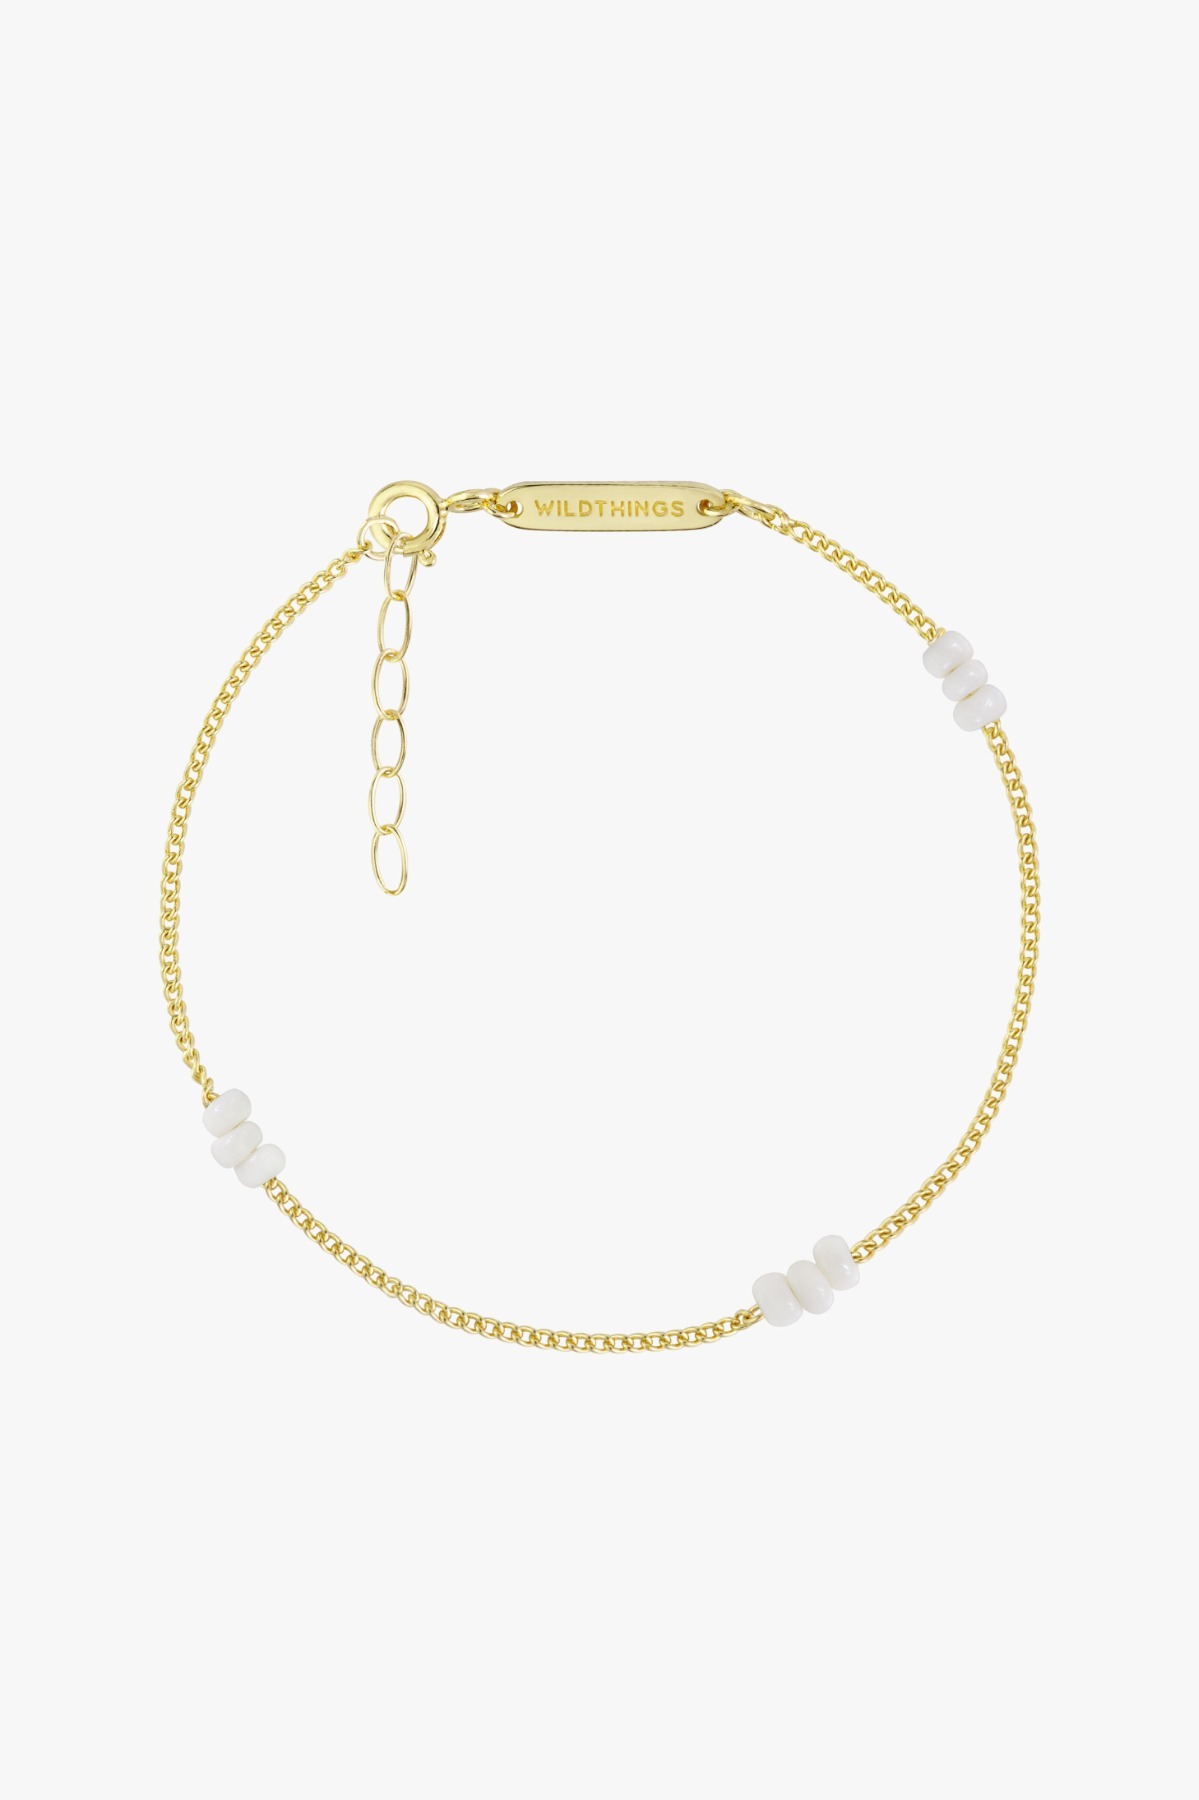 wildthings collectables - Triple white beads bracelet gold plated